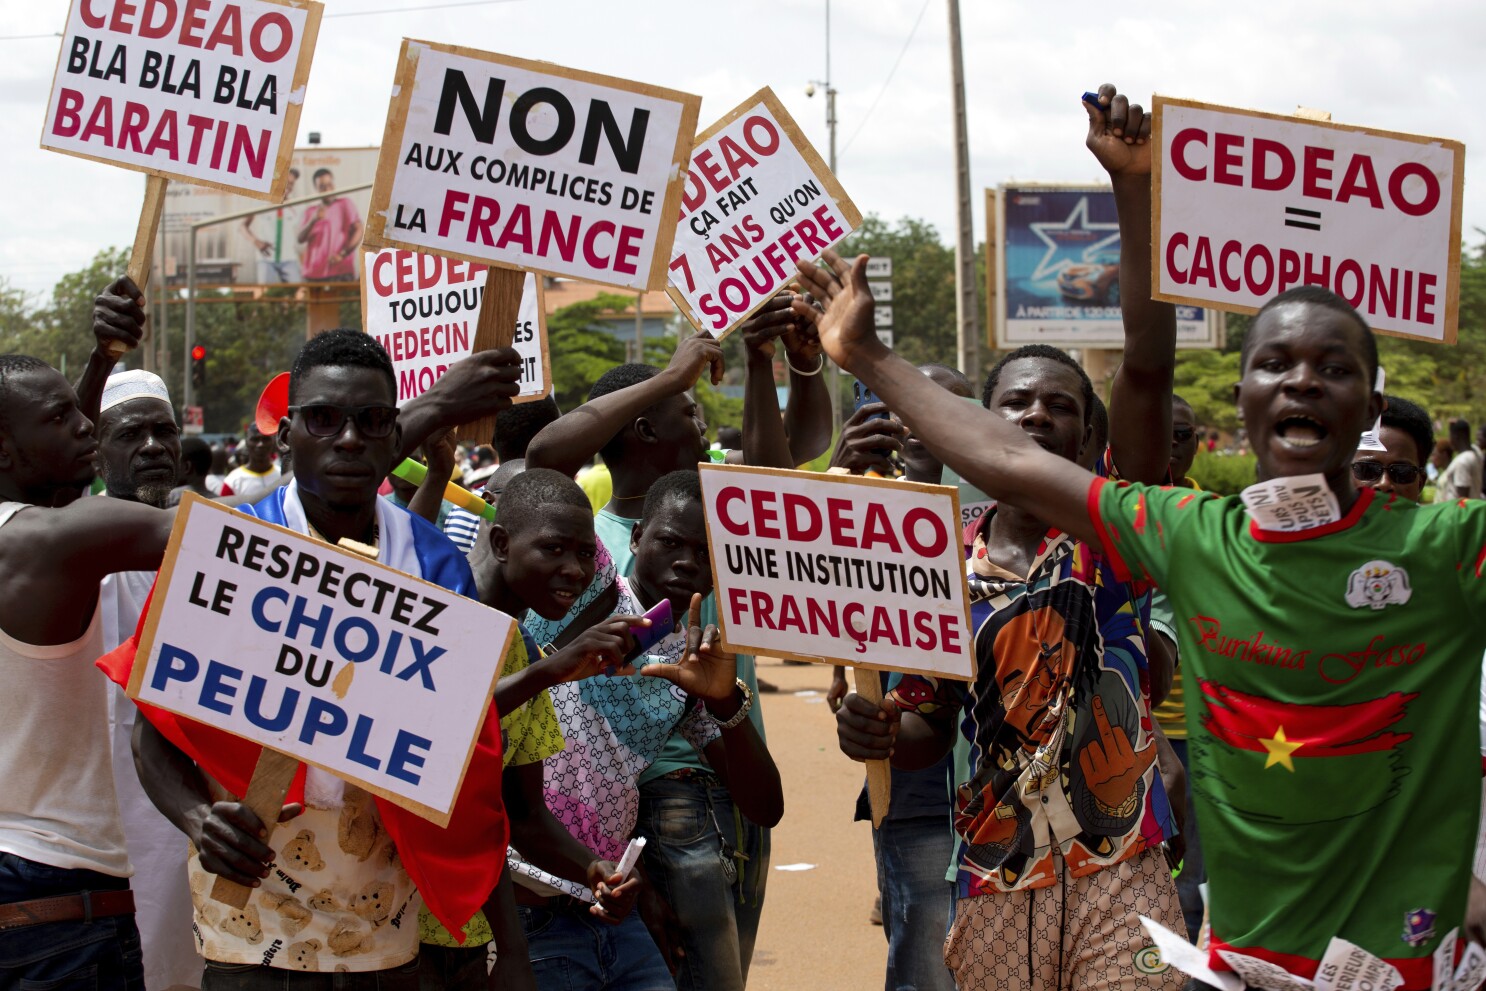 France's waning influence in coup-hit Africa appears clear while